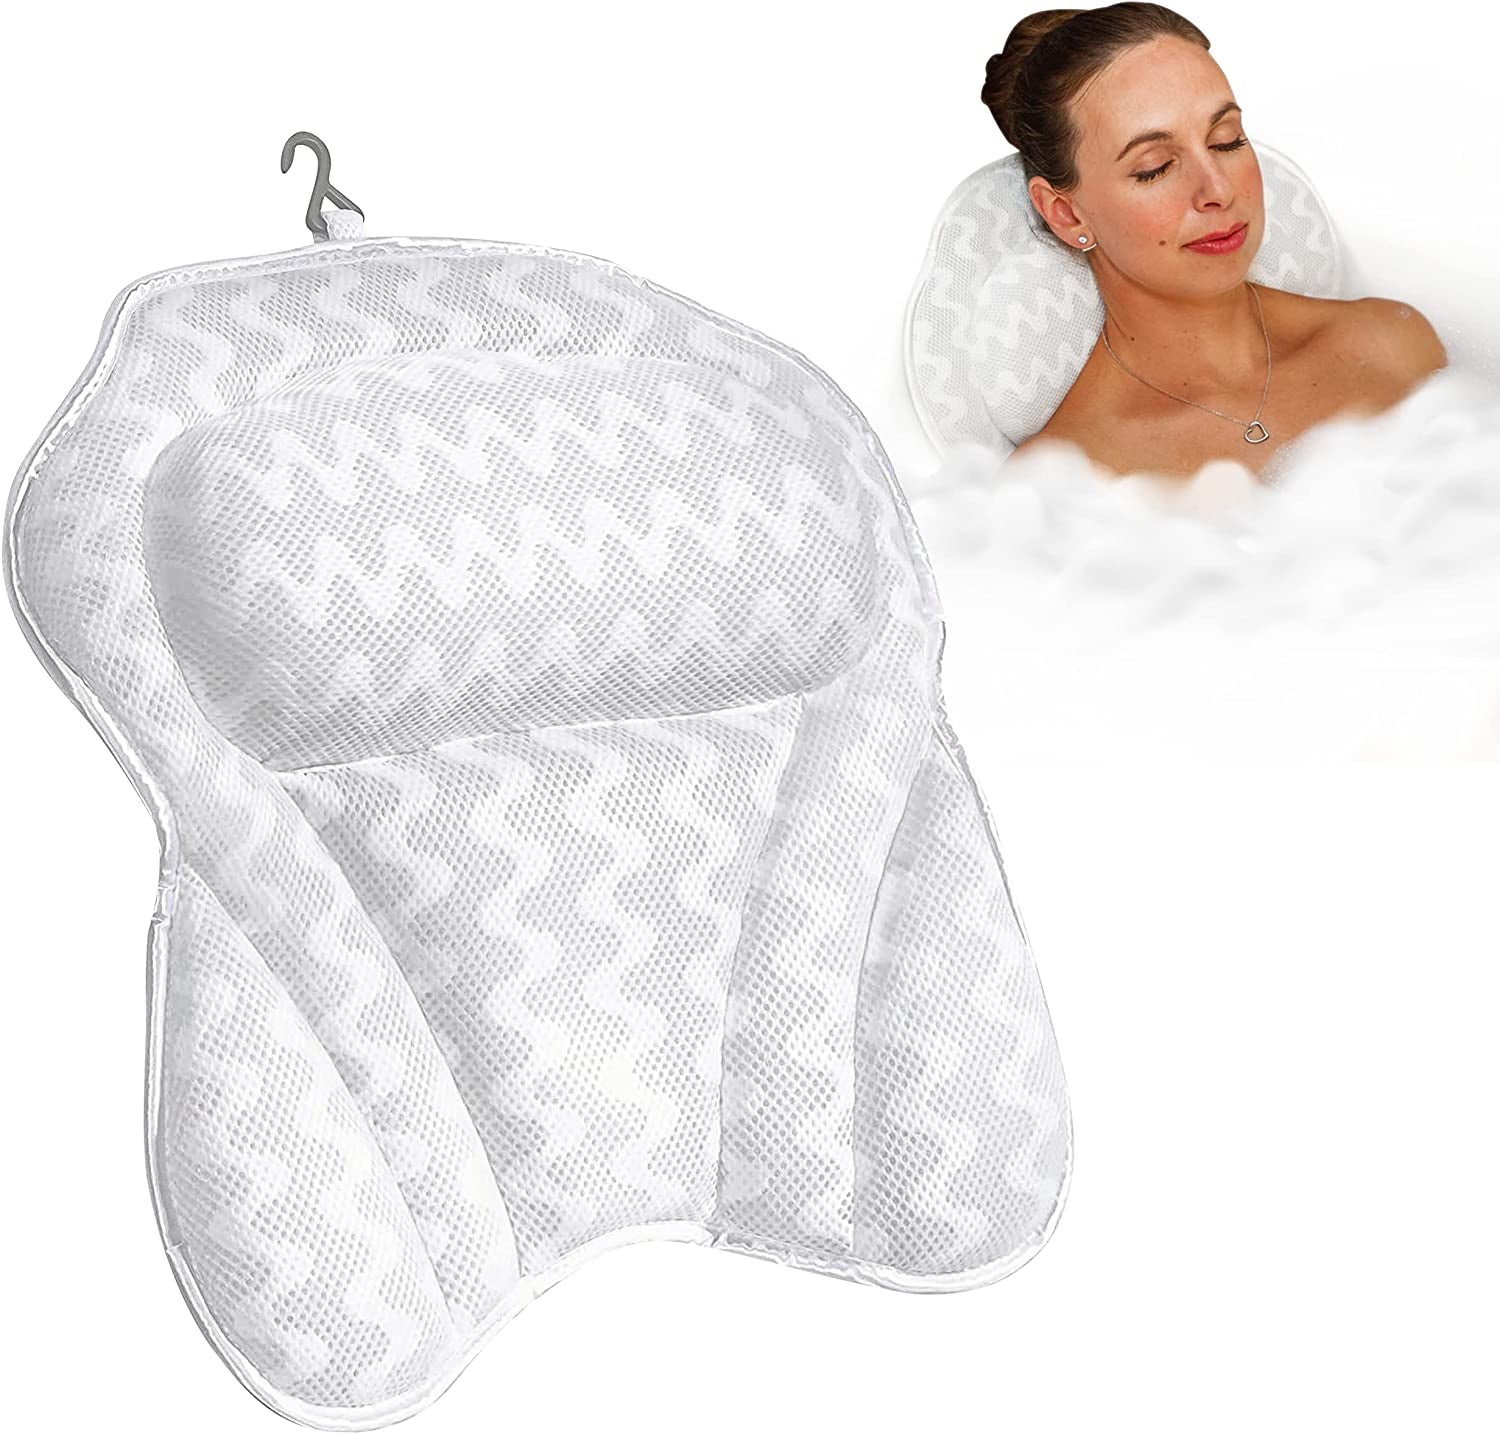 1pc 3D Mesh for Neck and Back Support Bathtub Head Rest Pillow Non